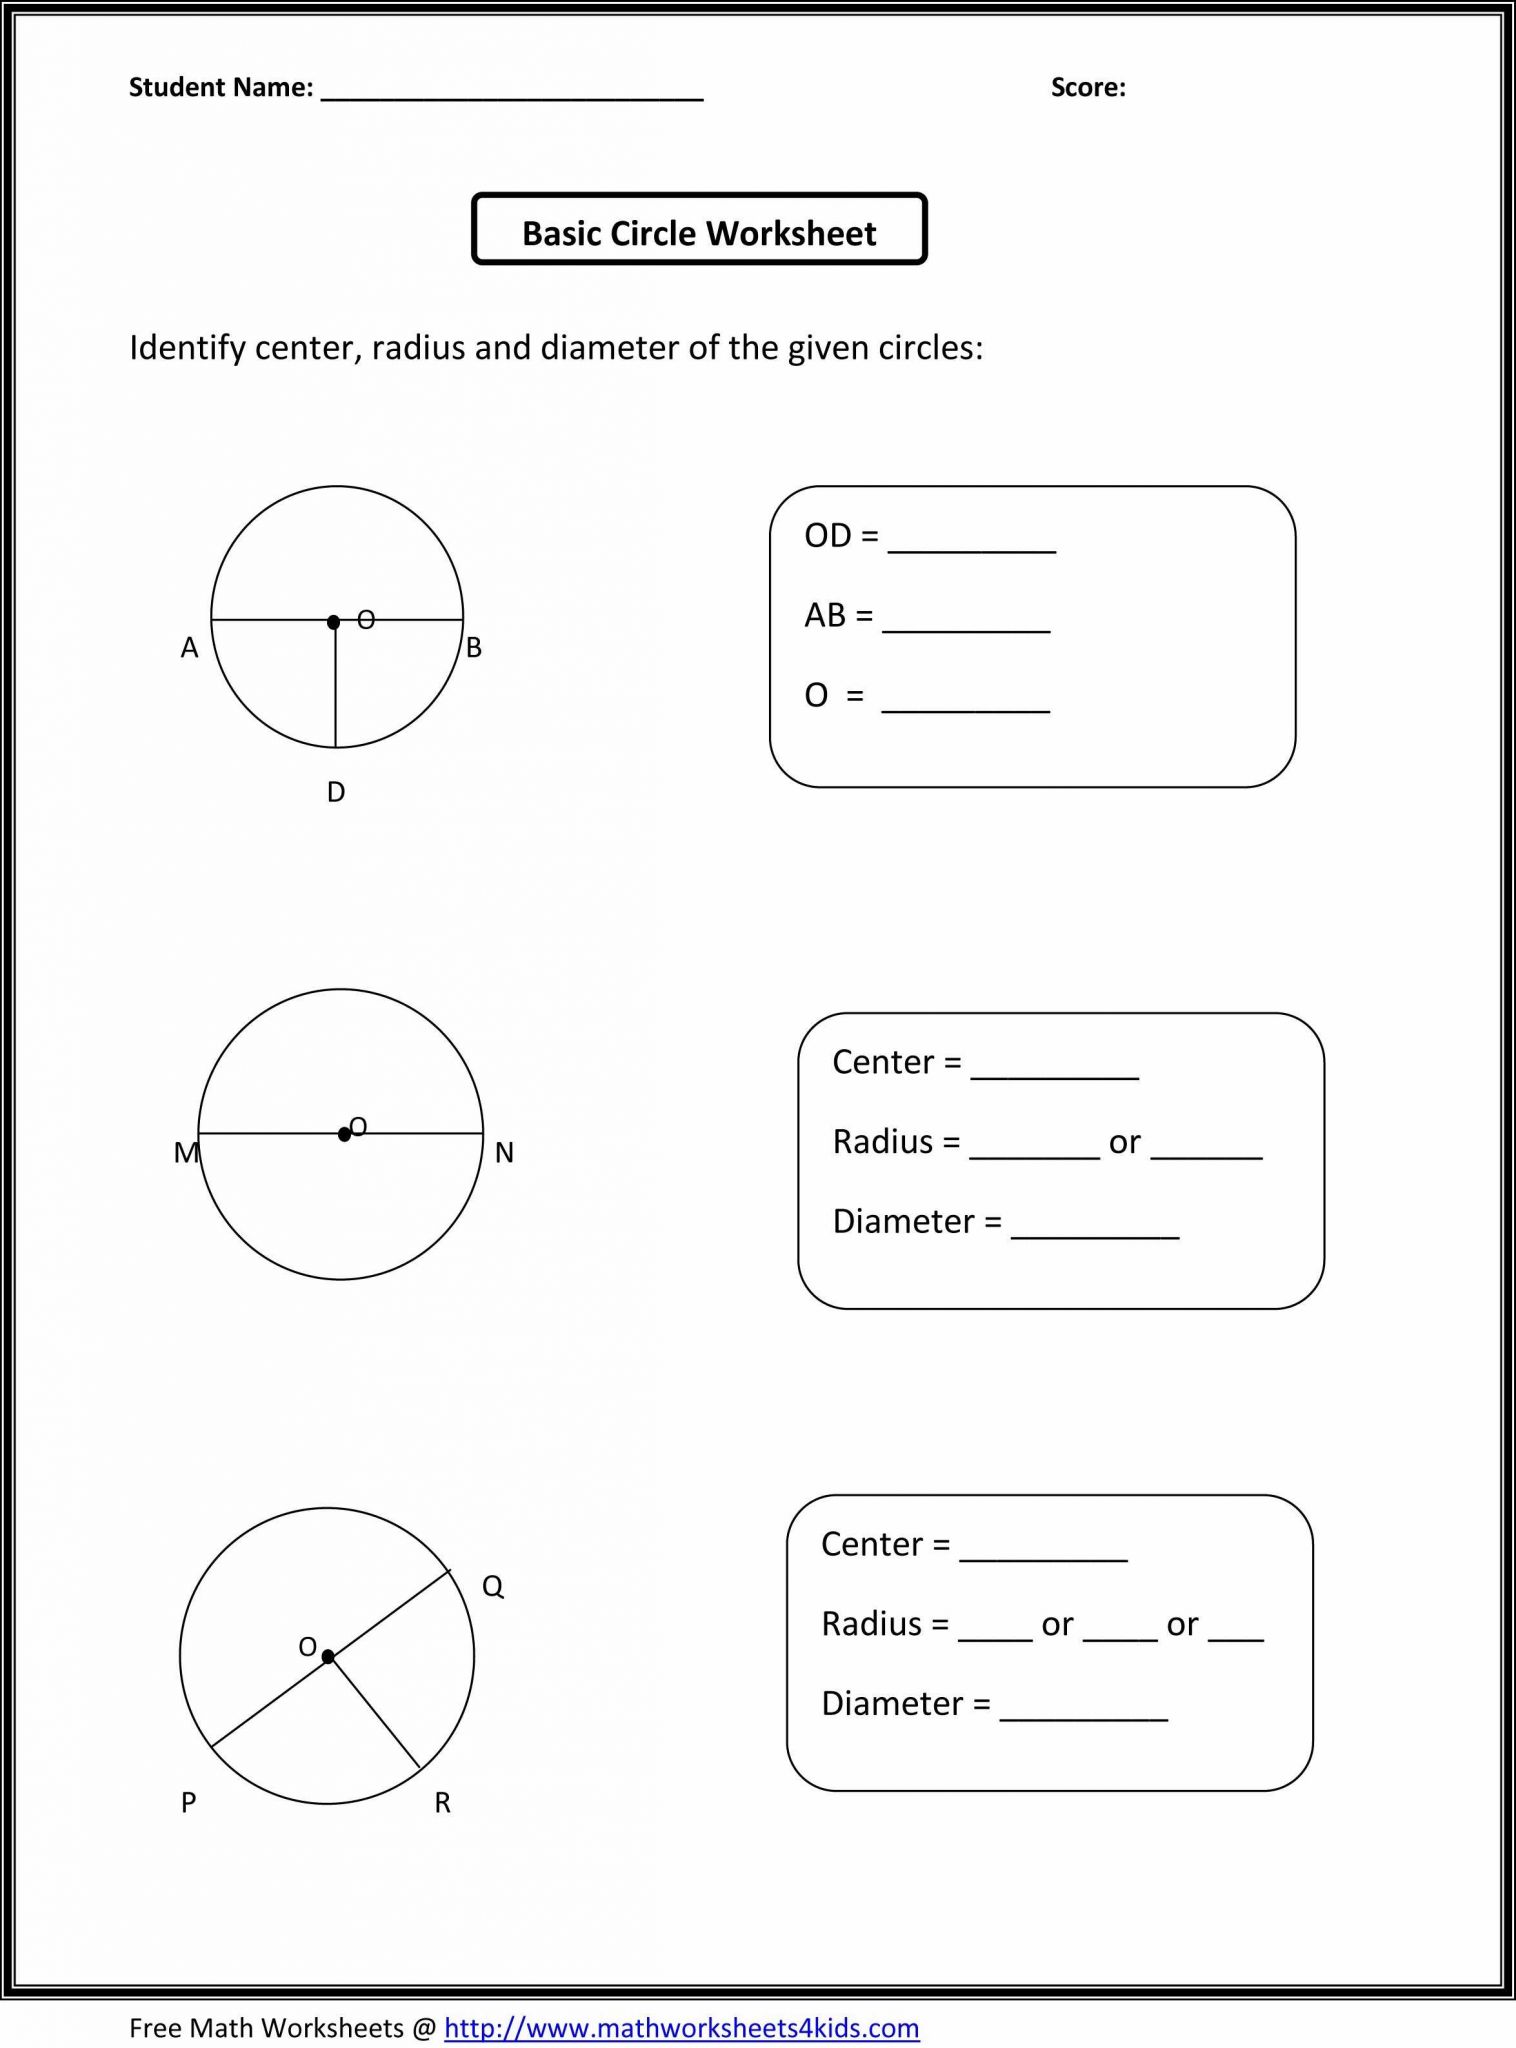 Solving Systems Of Linear Inequalities Worksheet Answers together with System Equations Word Problems Geometry Inspirationa Algebra